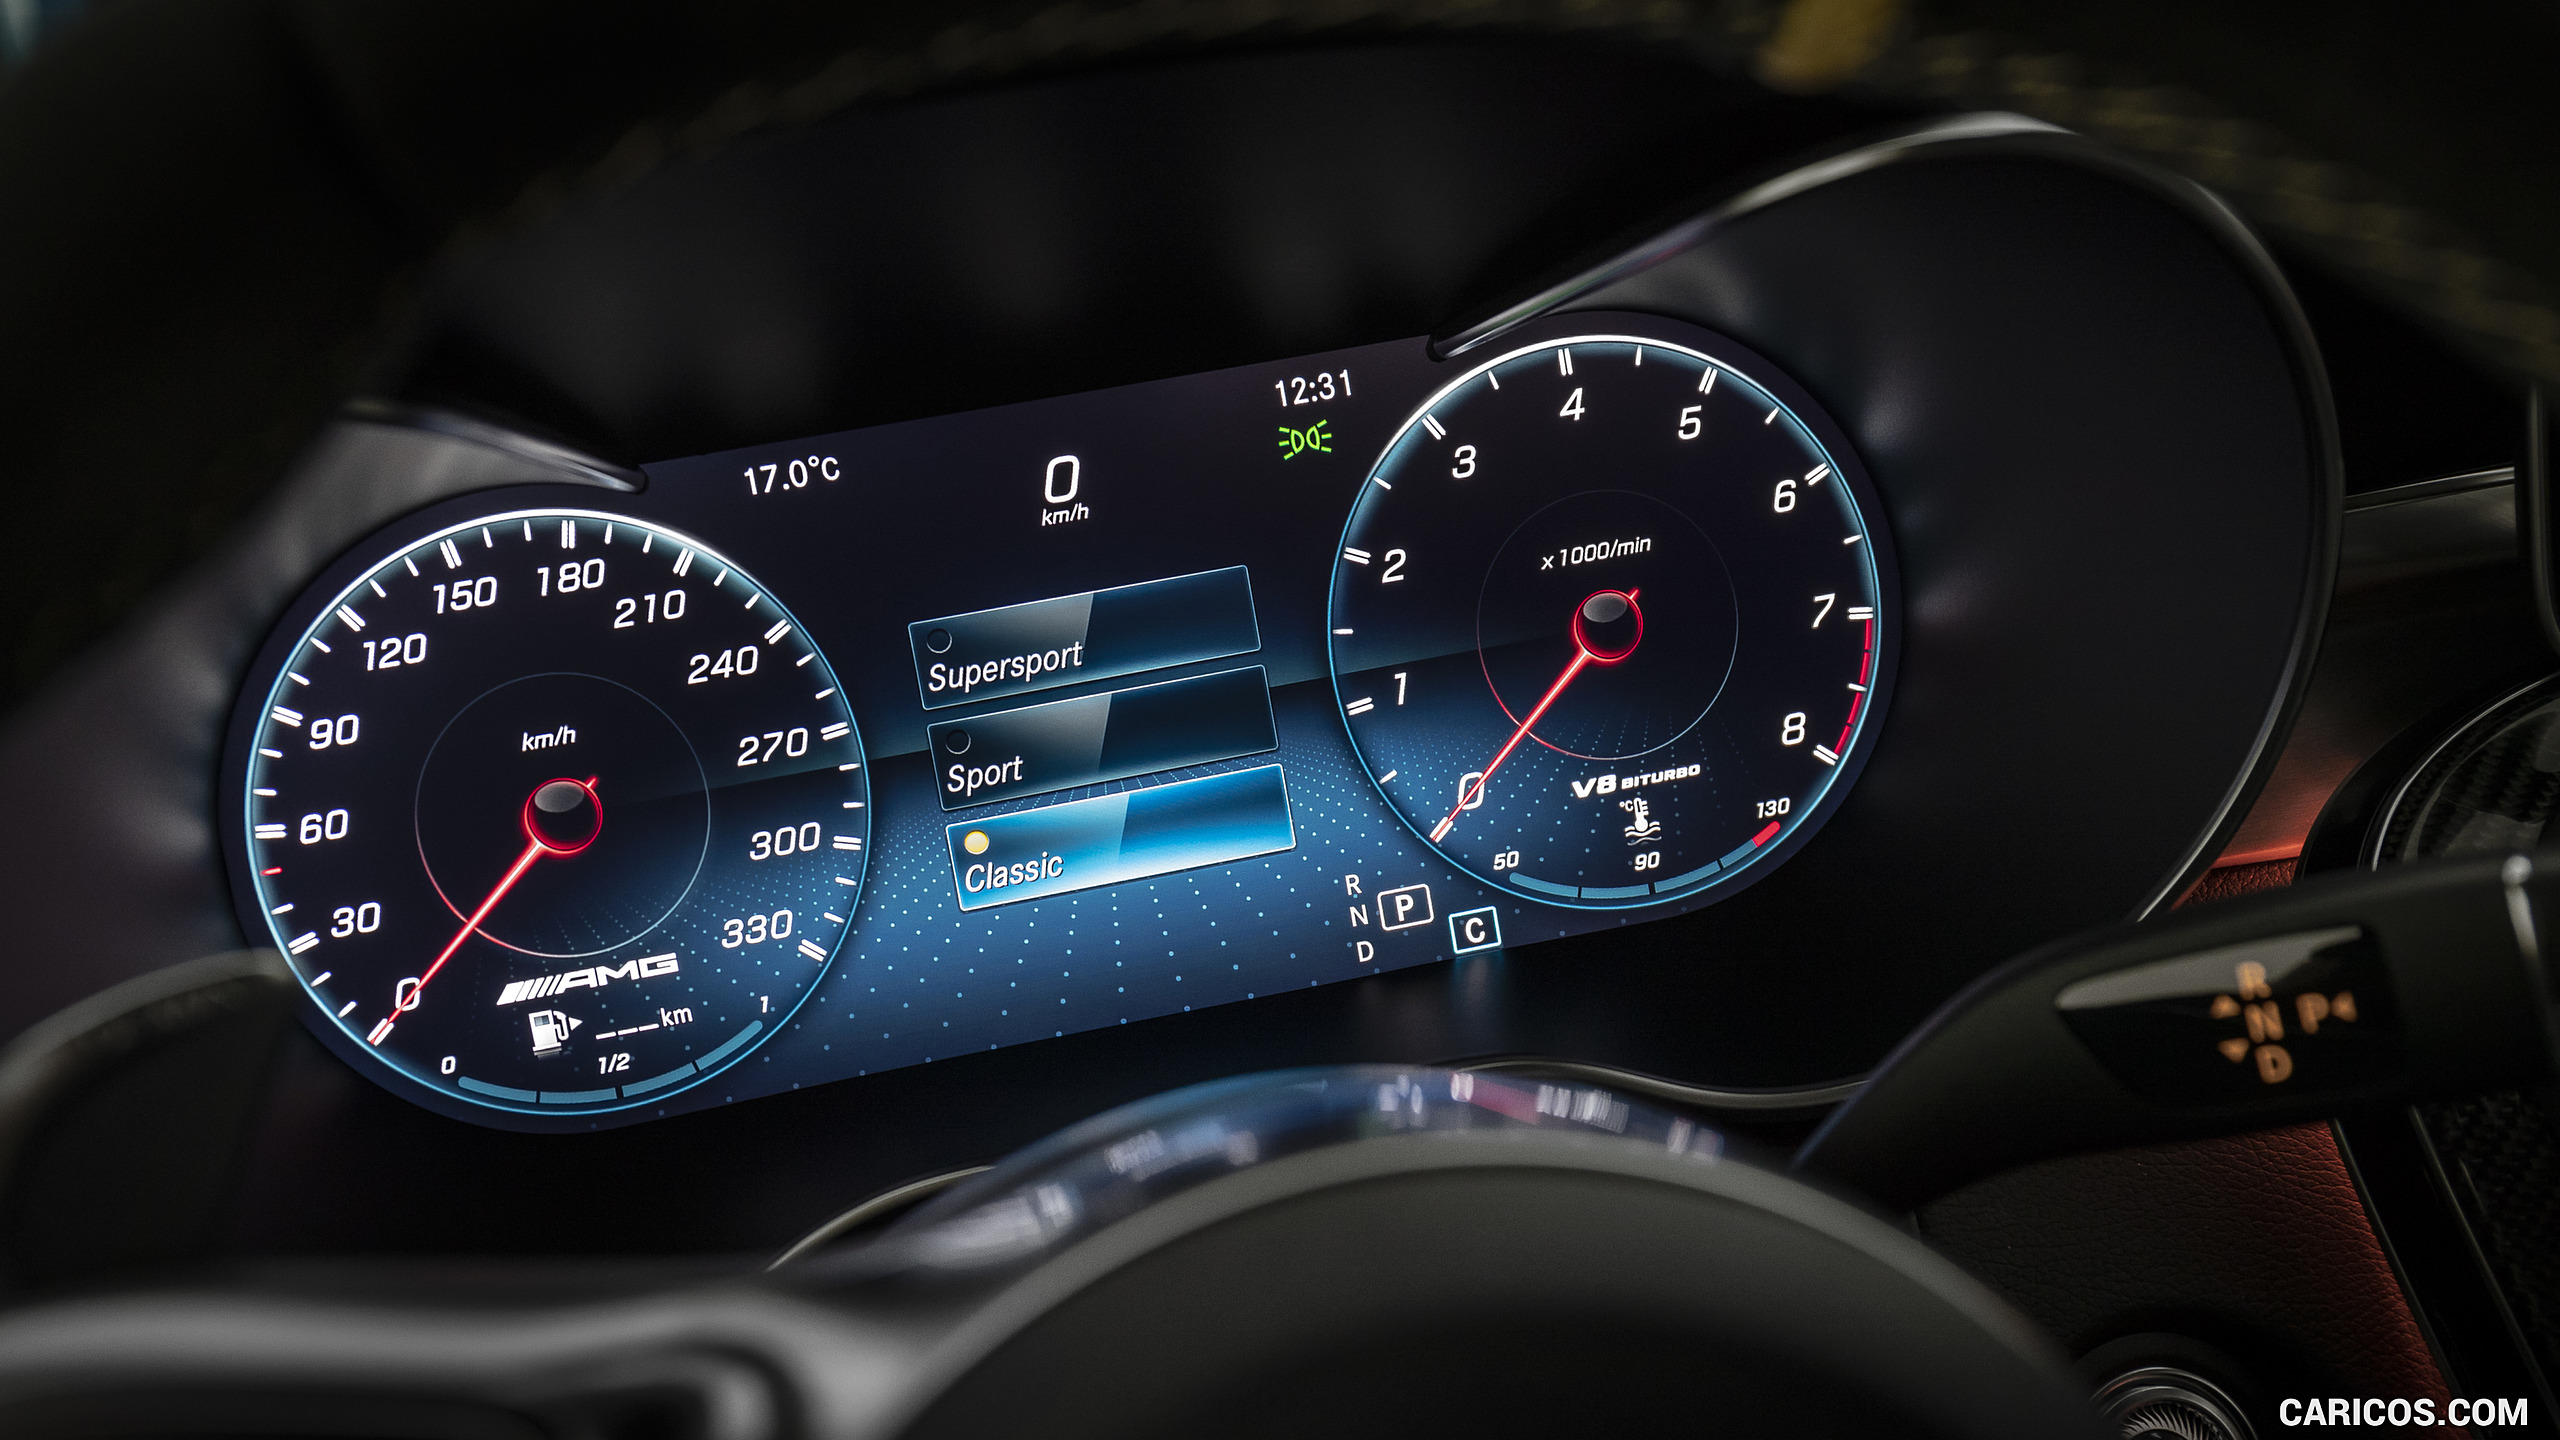 2019 Mercedes-AMG C 63 S Coupe - Digital Instrument Cluster, #98 of 106